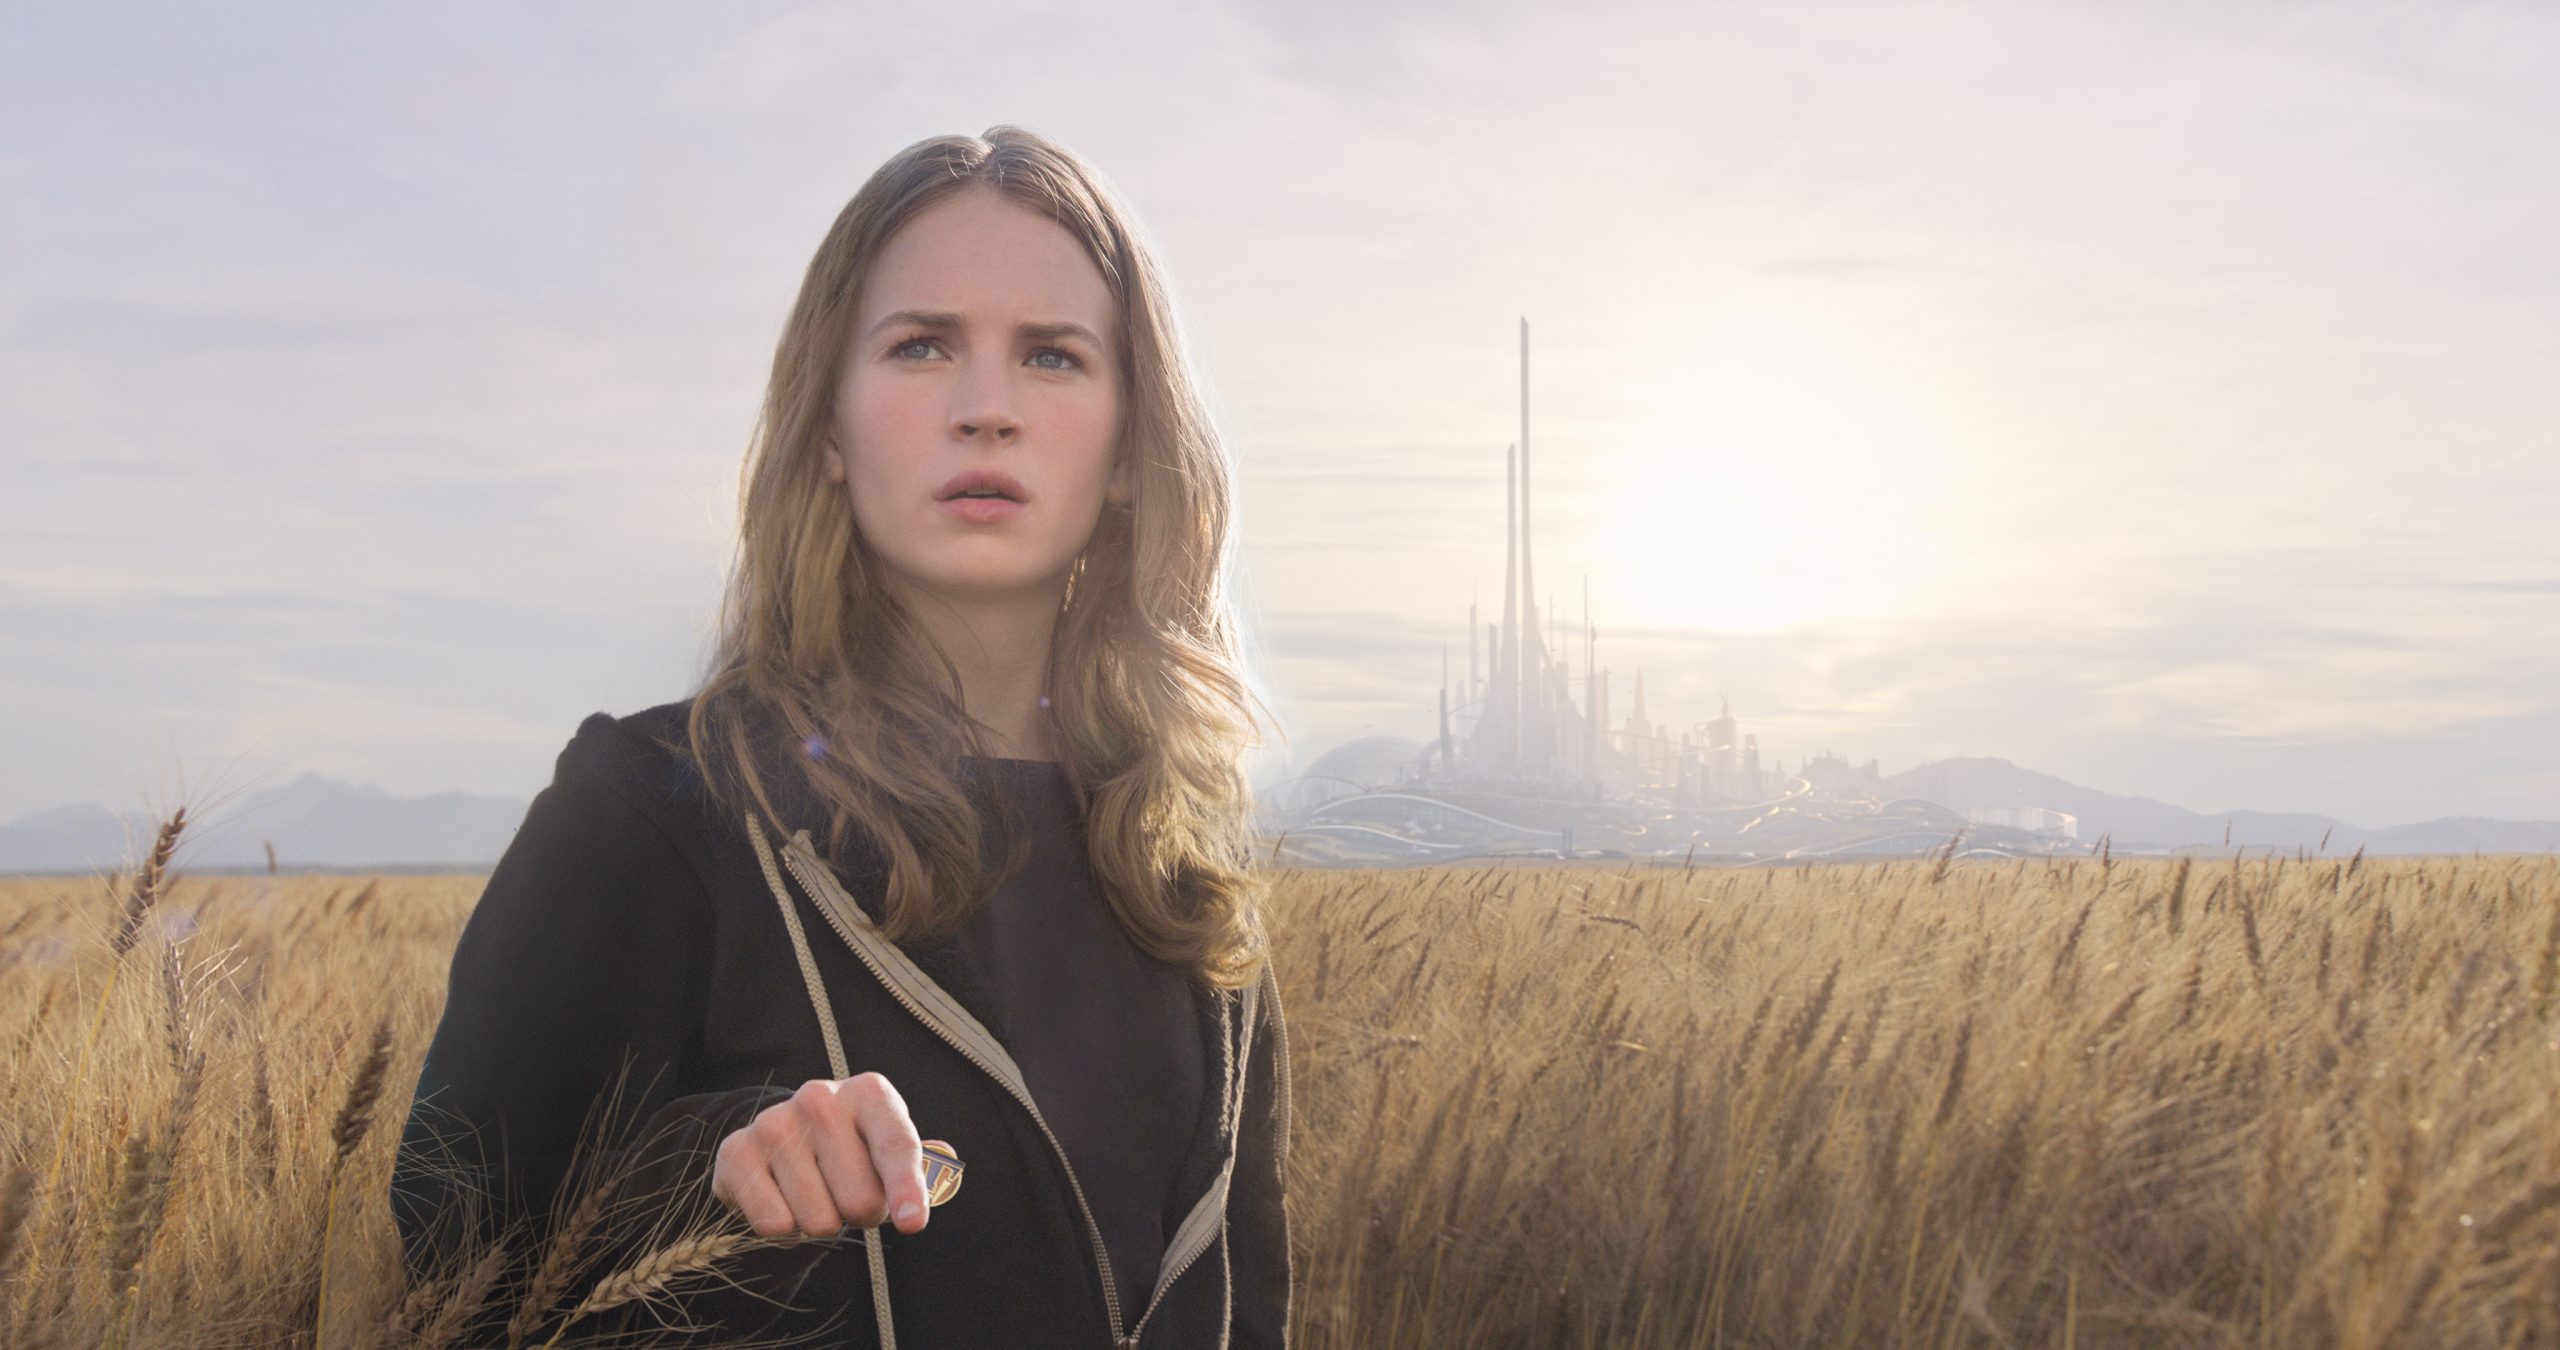 8 Tomorrowland Easter Eggs and Disney Connections